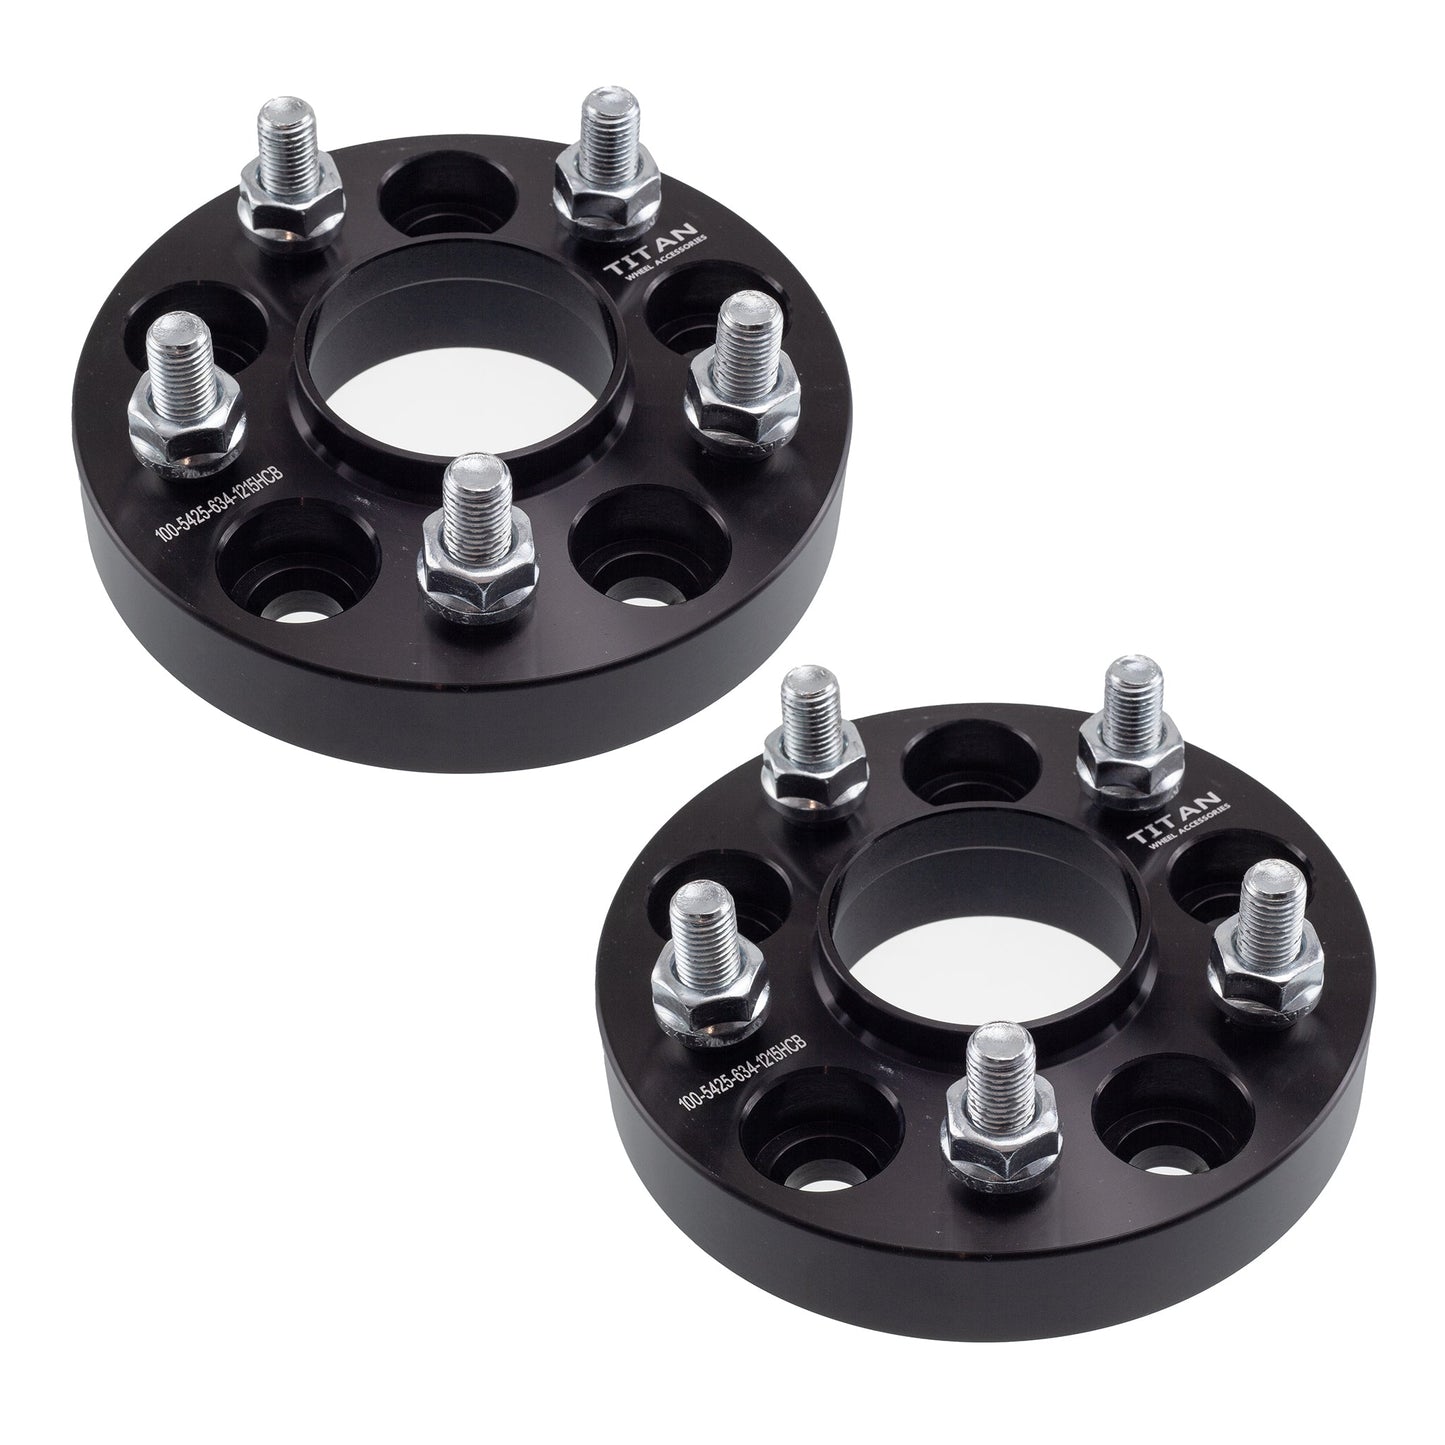 1.25" (32mm) Titan Wheel Spacers for Volvo C30 C70 S40 V50 | 5x4.25 (5x108) | 63.4 Hubcentric | 12x1.5 Studs |  Set of 4 | Titan Wheel Accessories